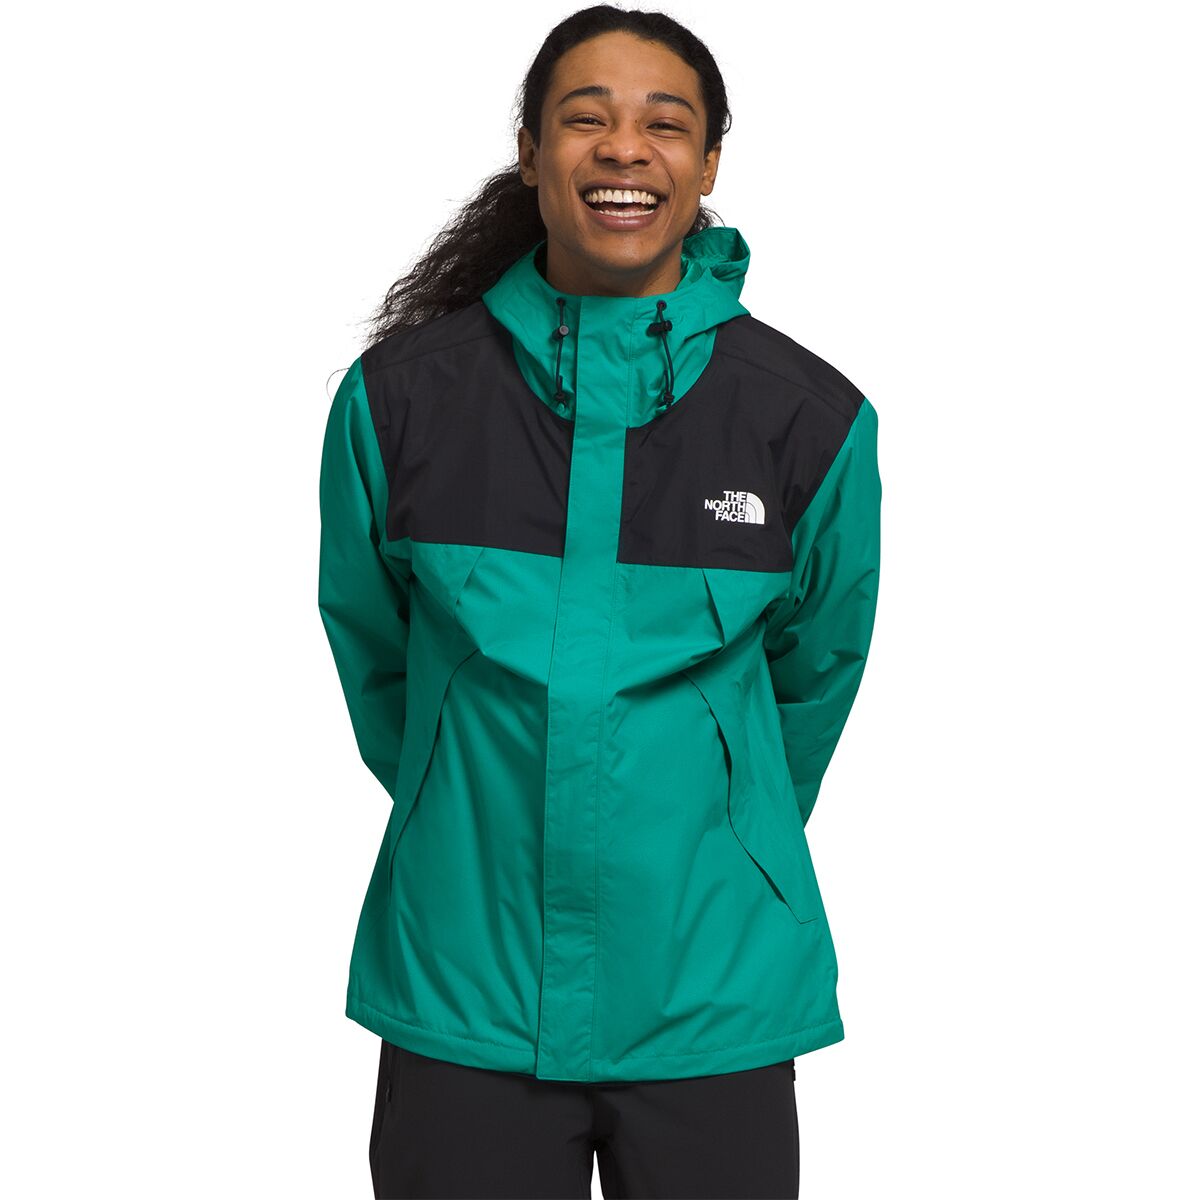 Antora Jacket - Men's by The North Face | US-Parks.com